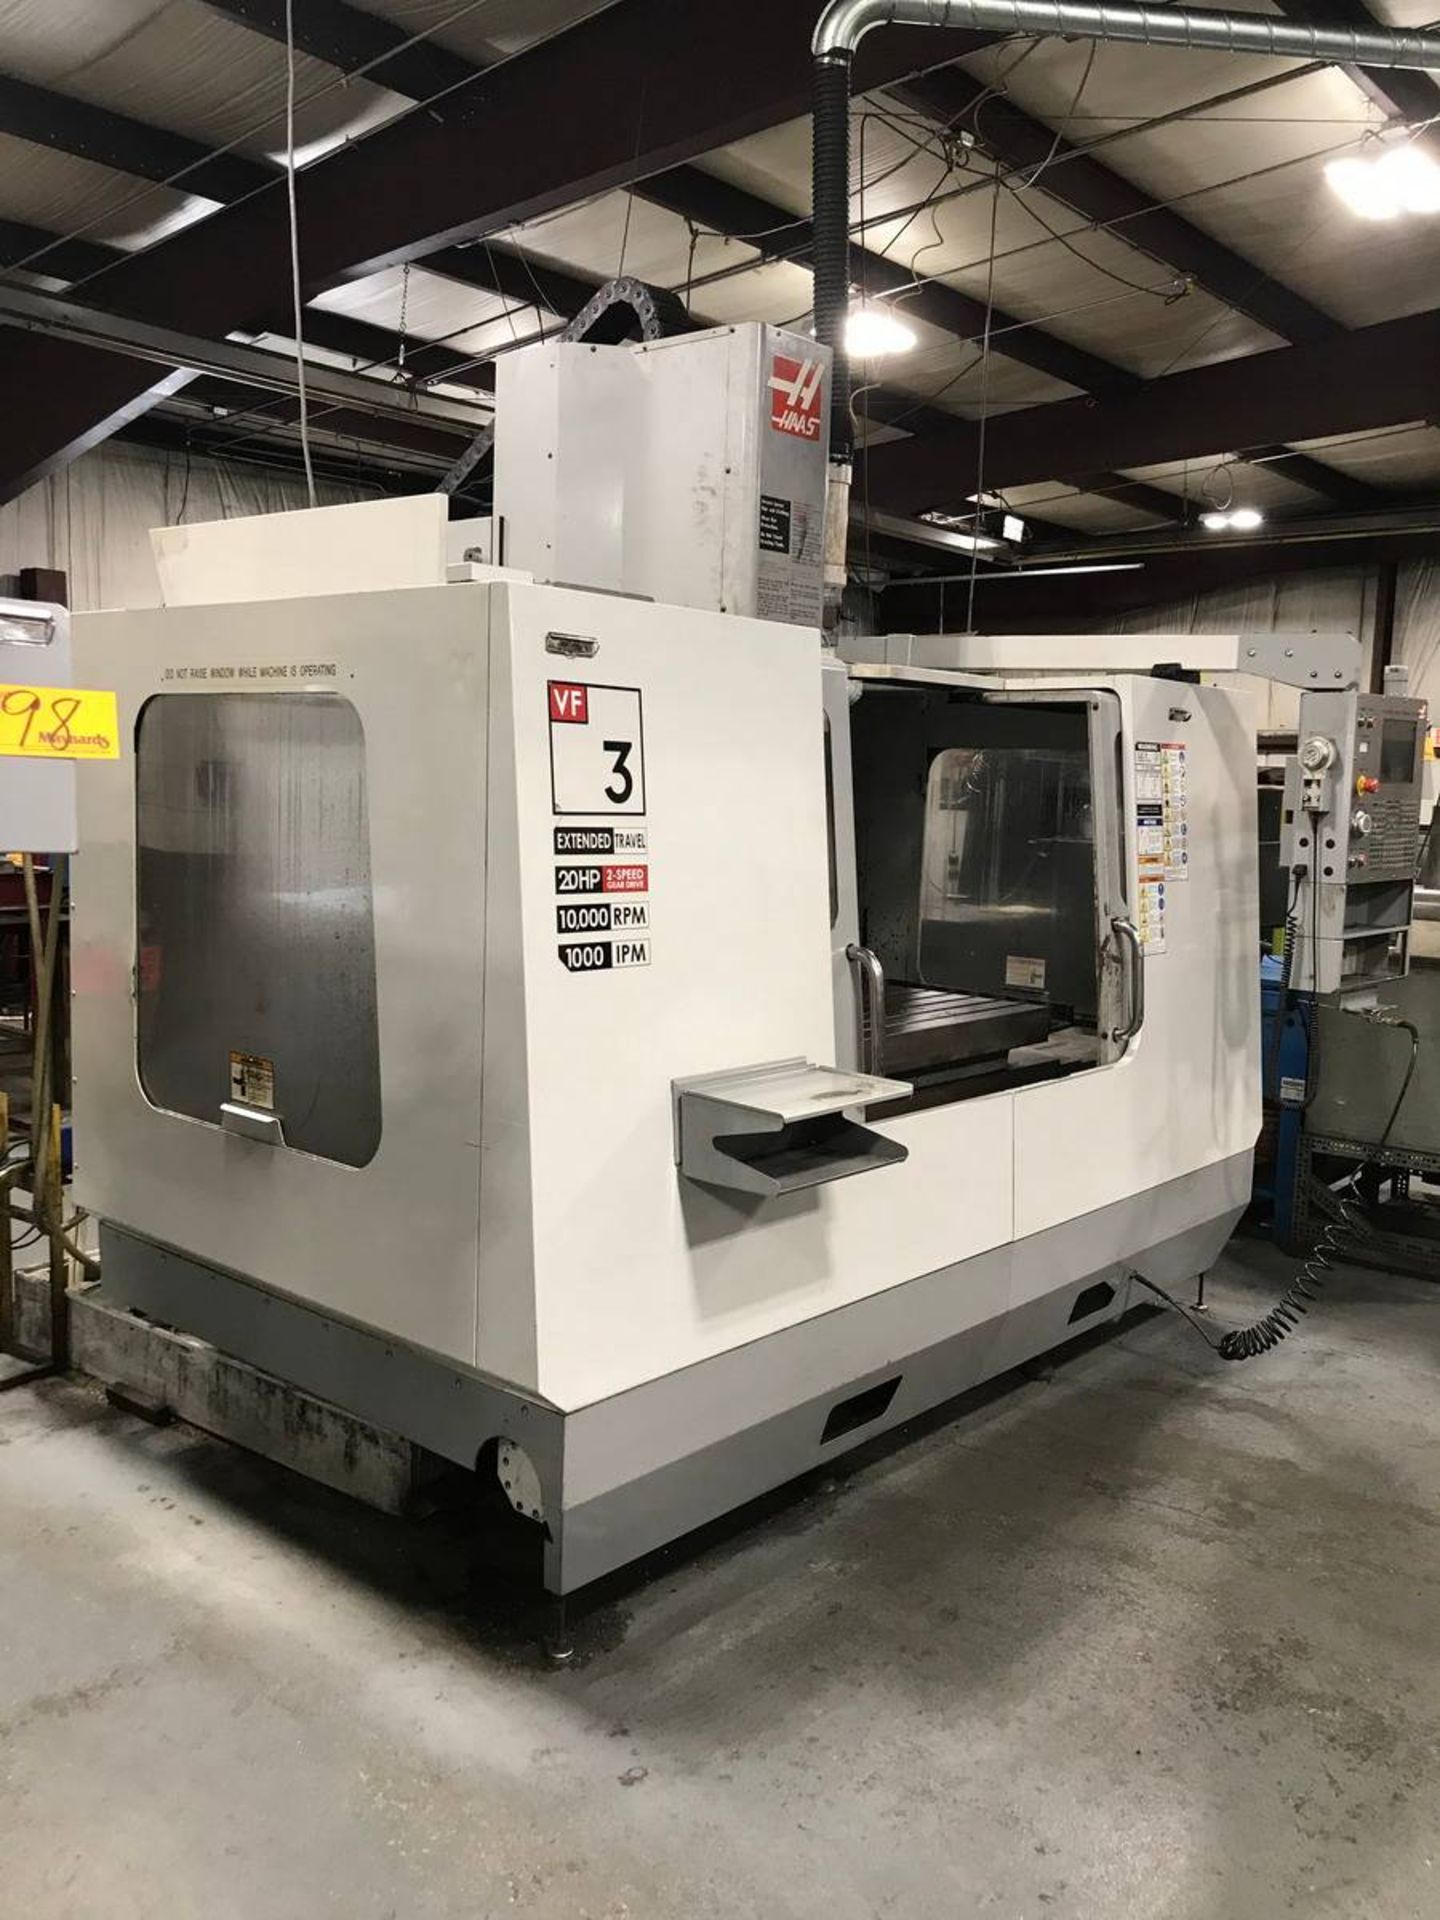 2005 HAAS VF-3BYT CNC Vertical Machine Center - Image 2 of 9